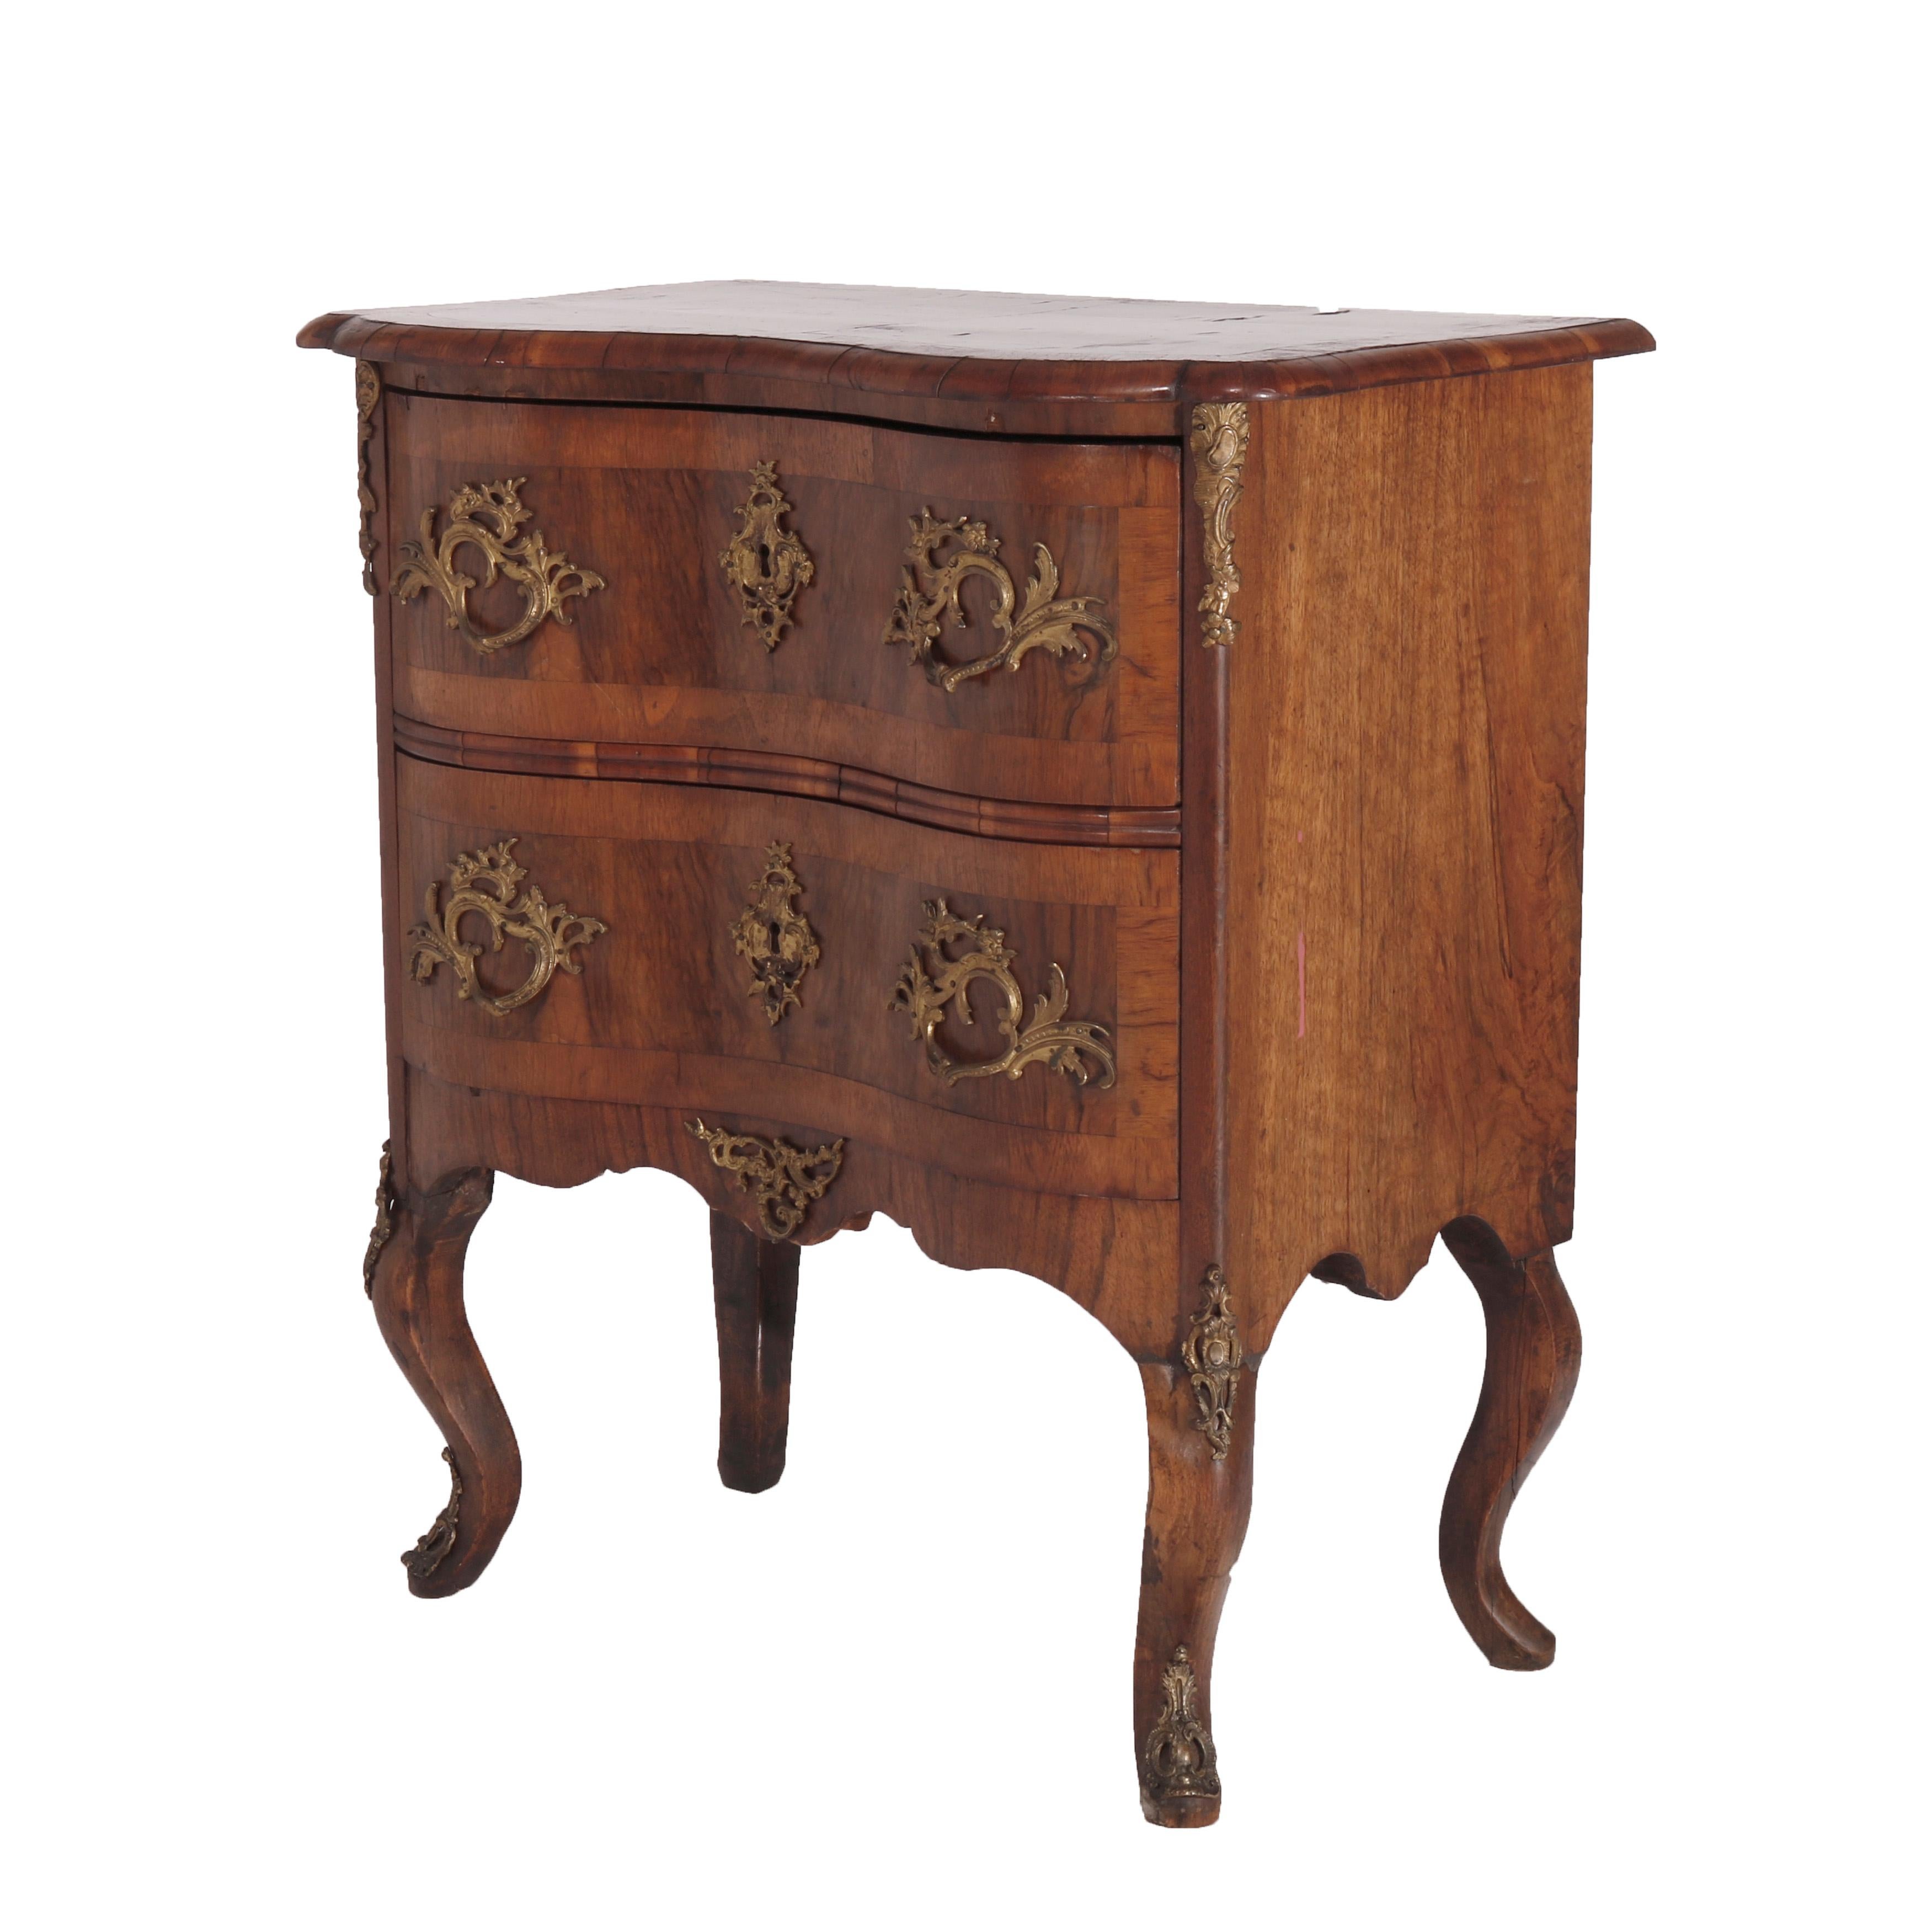  Antique Italian Kingwood, Satinwood & Burl Chest with Ormolu Mounts Late 18th C For Sale 7